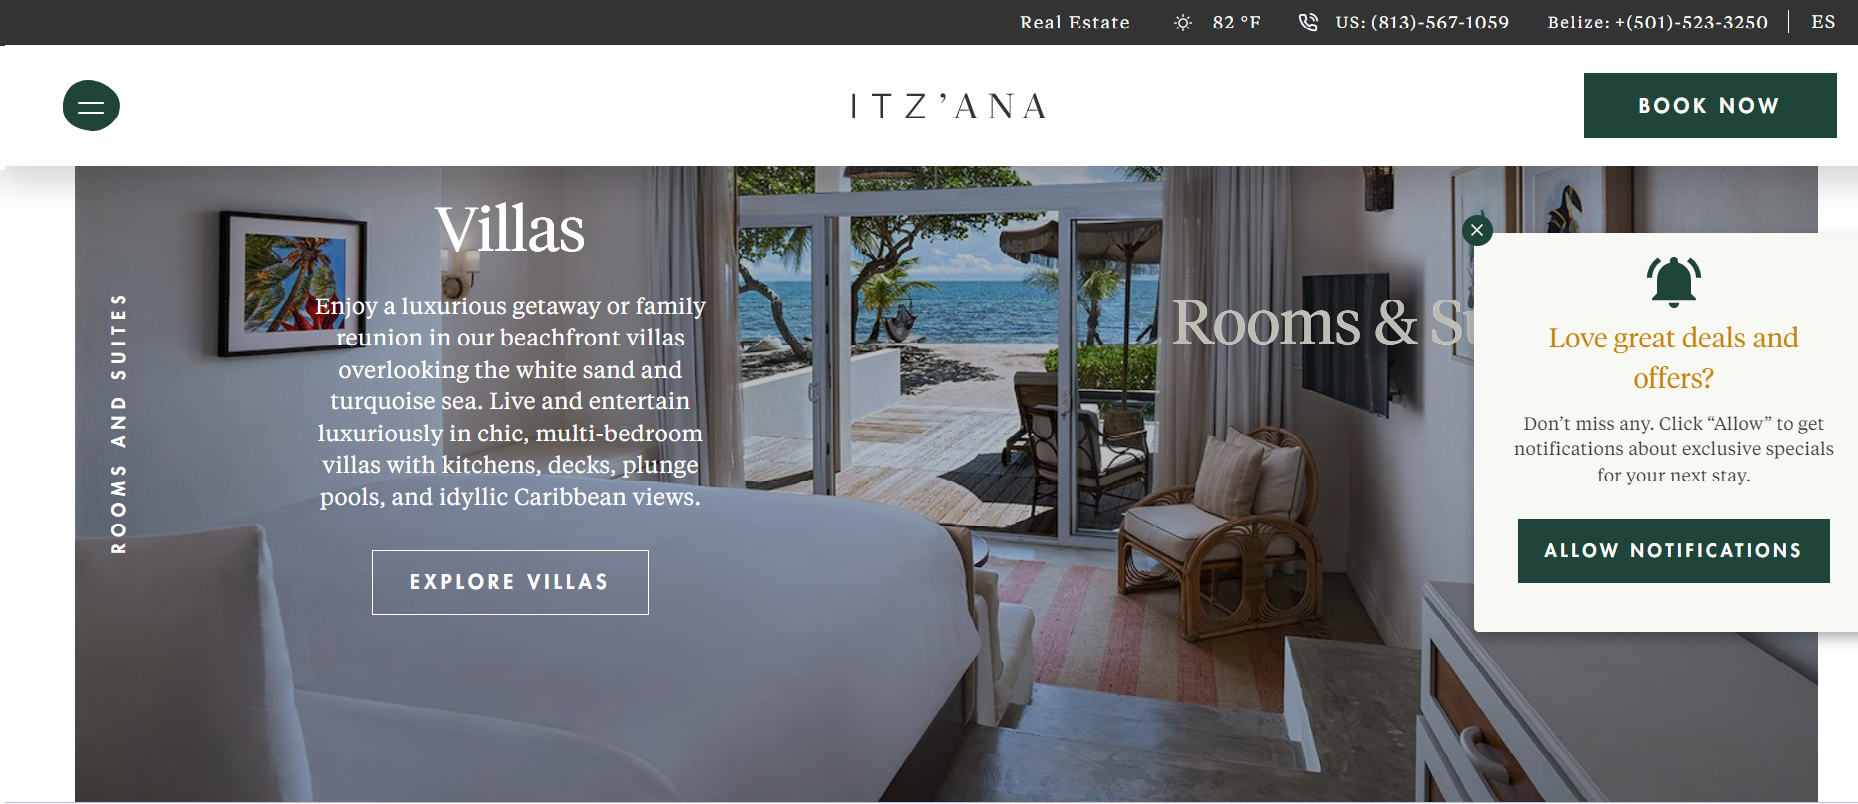 ITZ'ANA Website Luxury Real Estate.png